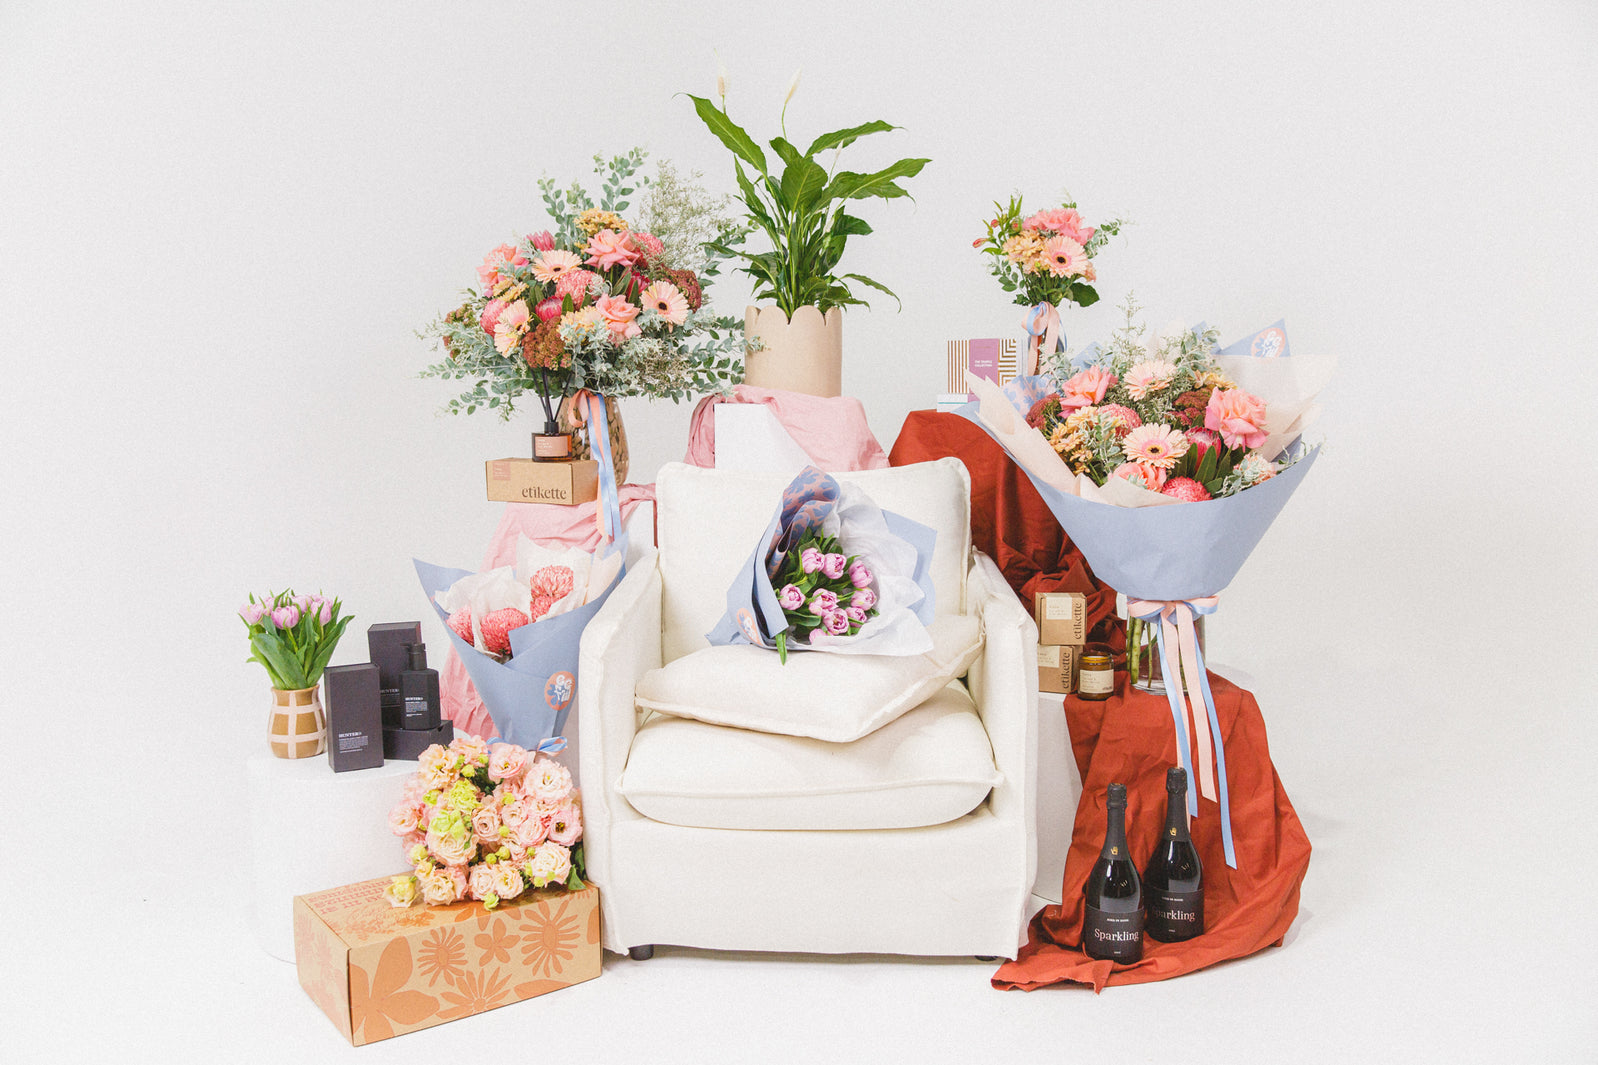 Introducing Our Mother's Day Collection